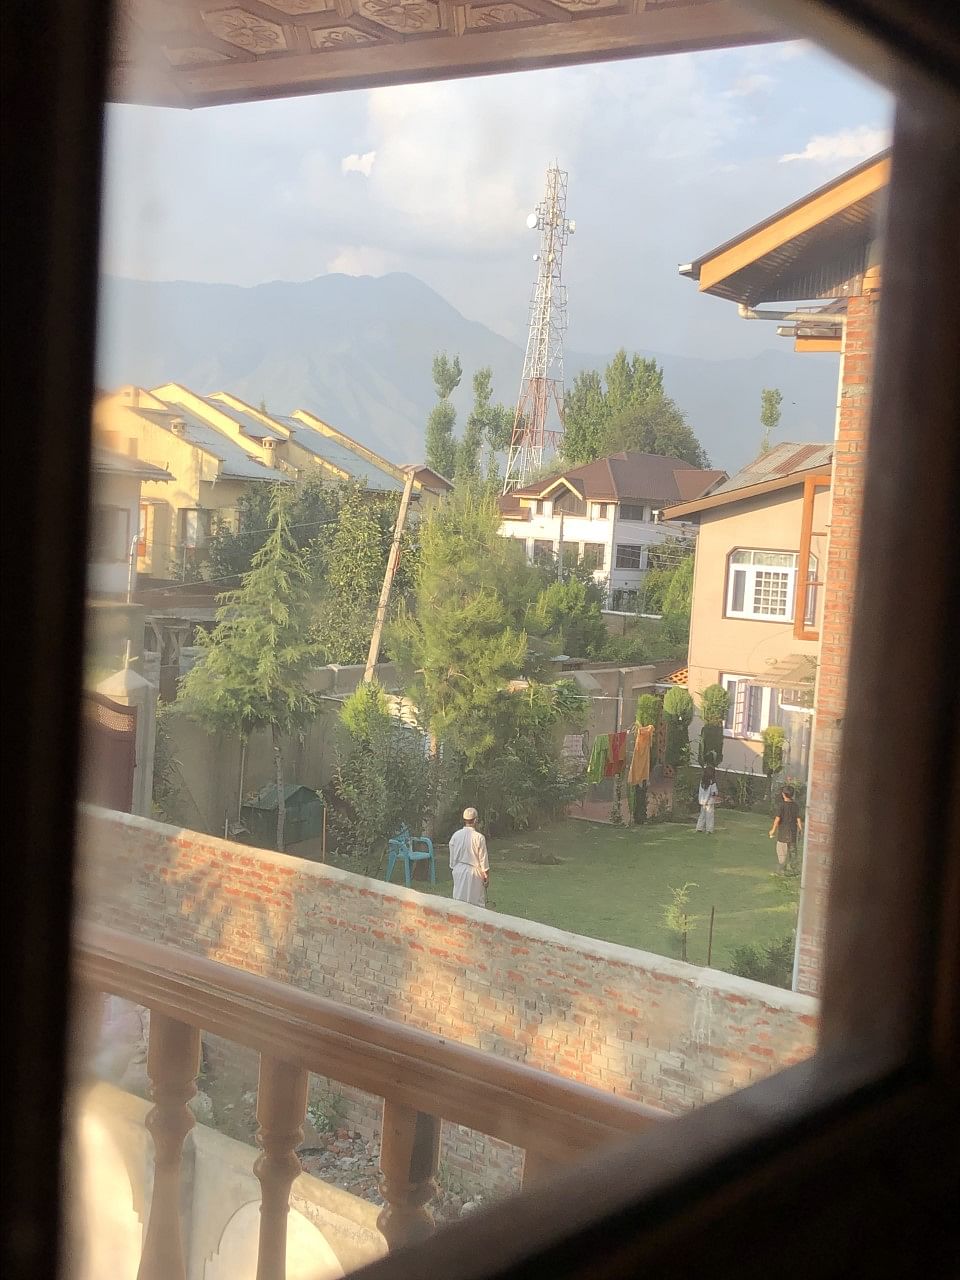 Hera was visiting a friend in Kashmir when the abrogation of Article 370 was announced.